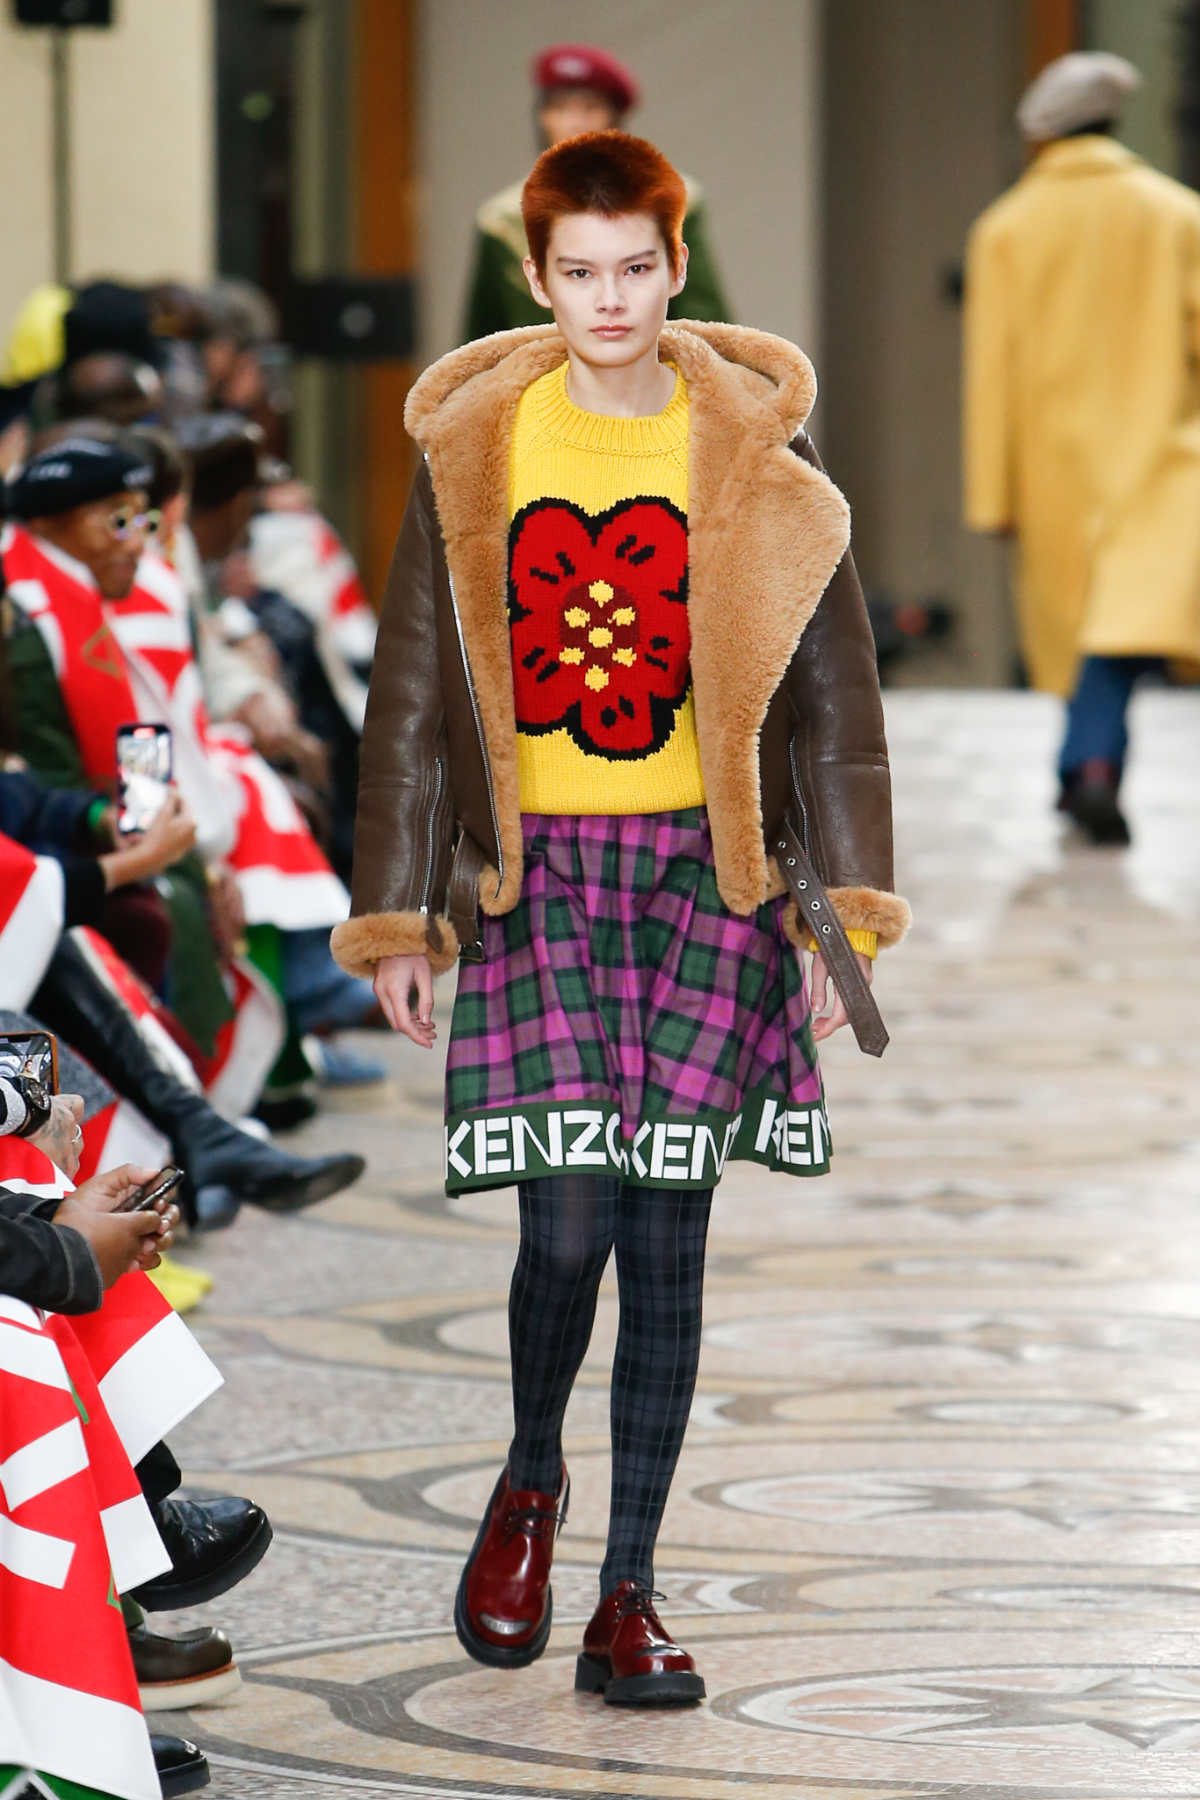 Kenzo Presents Its Fall/Winter 2022 Women’s And Men’s Collection By Nigo